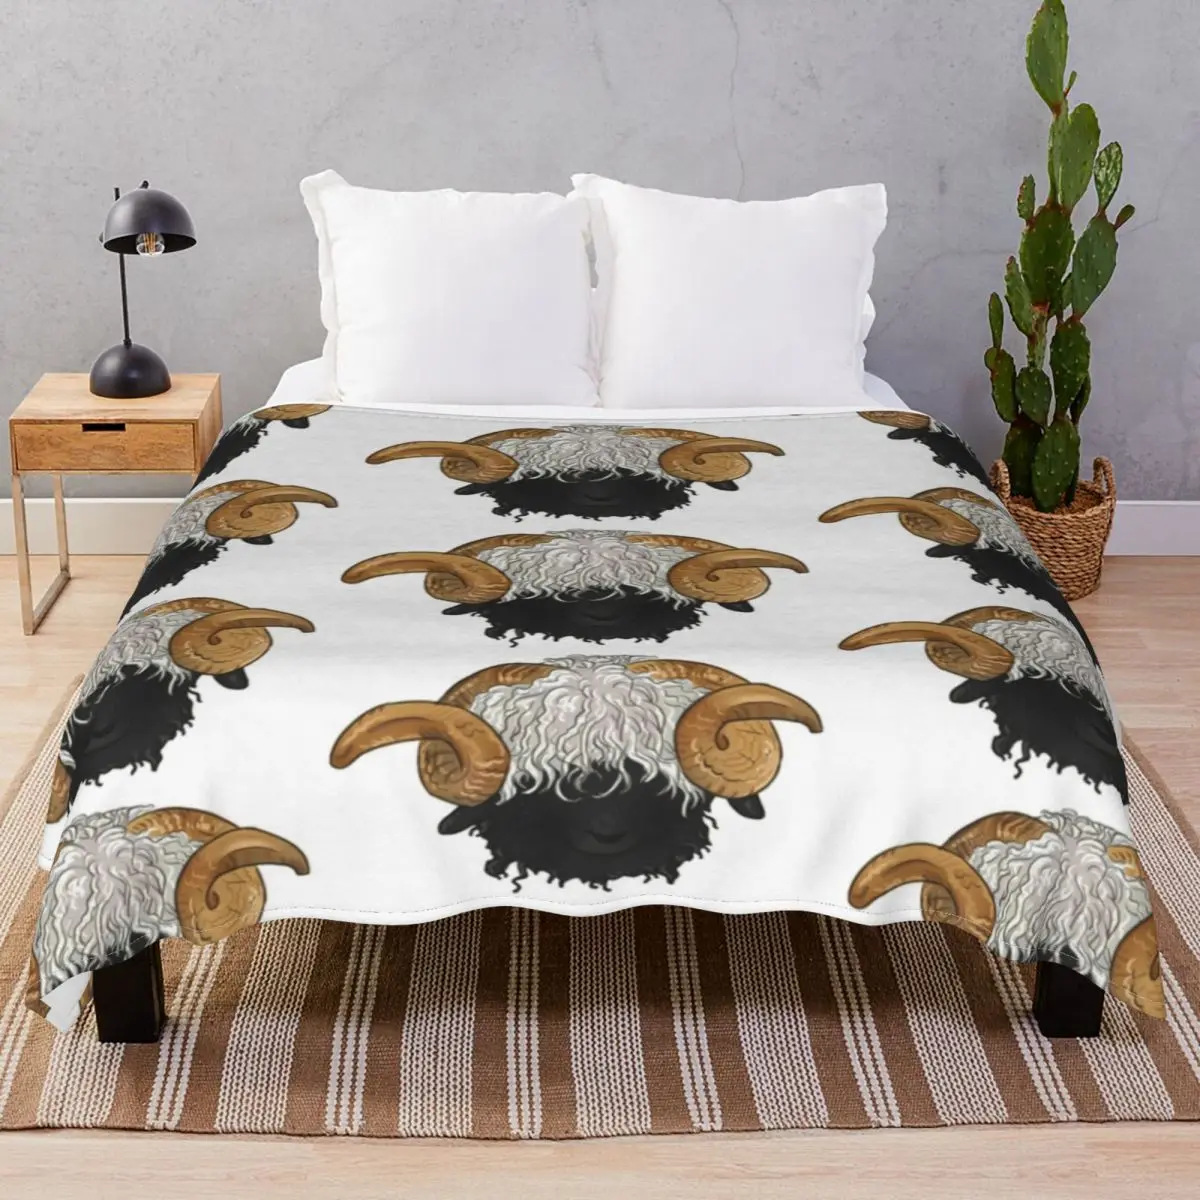 Valais Blacknose Sheep Blanket Flannel Plush Print Lightweight Throw Blankets for Bed Home Couch Travel Office